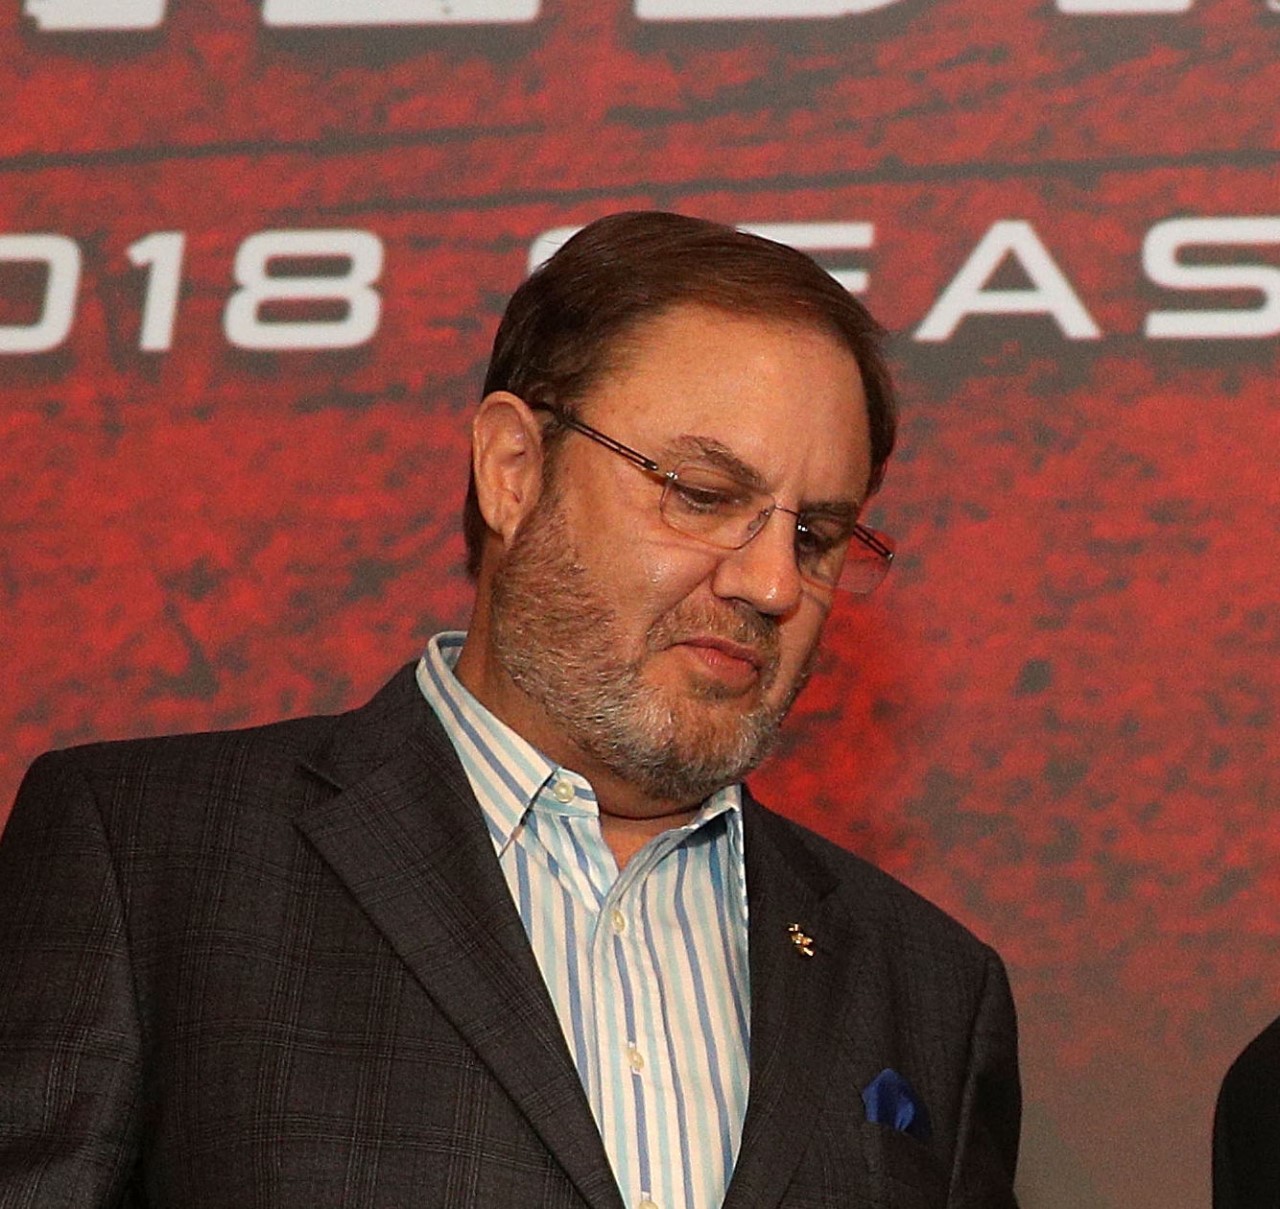 Like most race promoters, Eddie Gossage will not renew with IndyCar unless the sanction fee is reduced. They are not in business to lose money